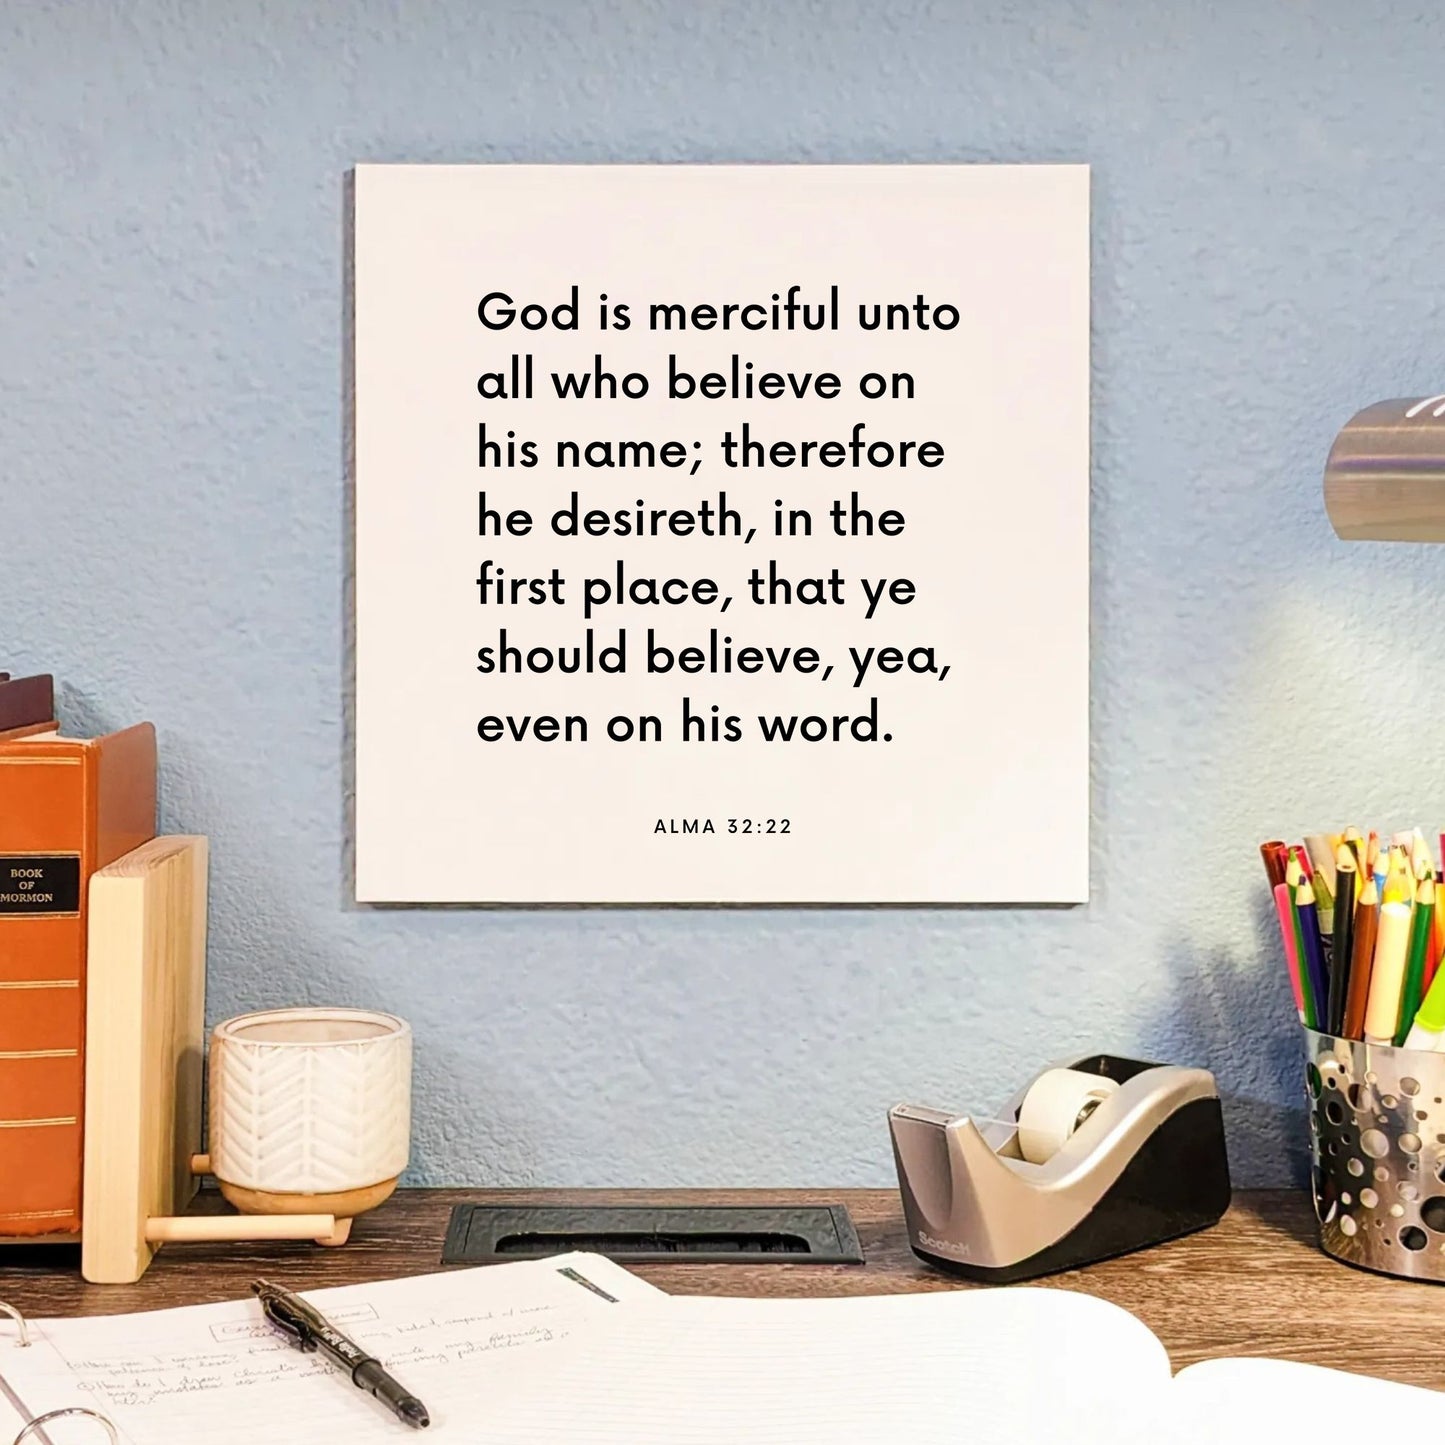 Desk mouting of the scripture tile for Alma 32:22 - "God is merciful unto all who believe on his name"